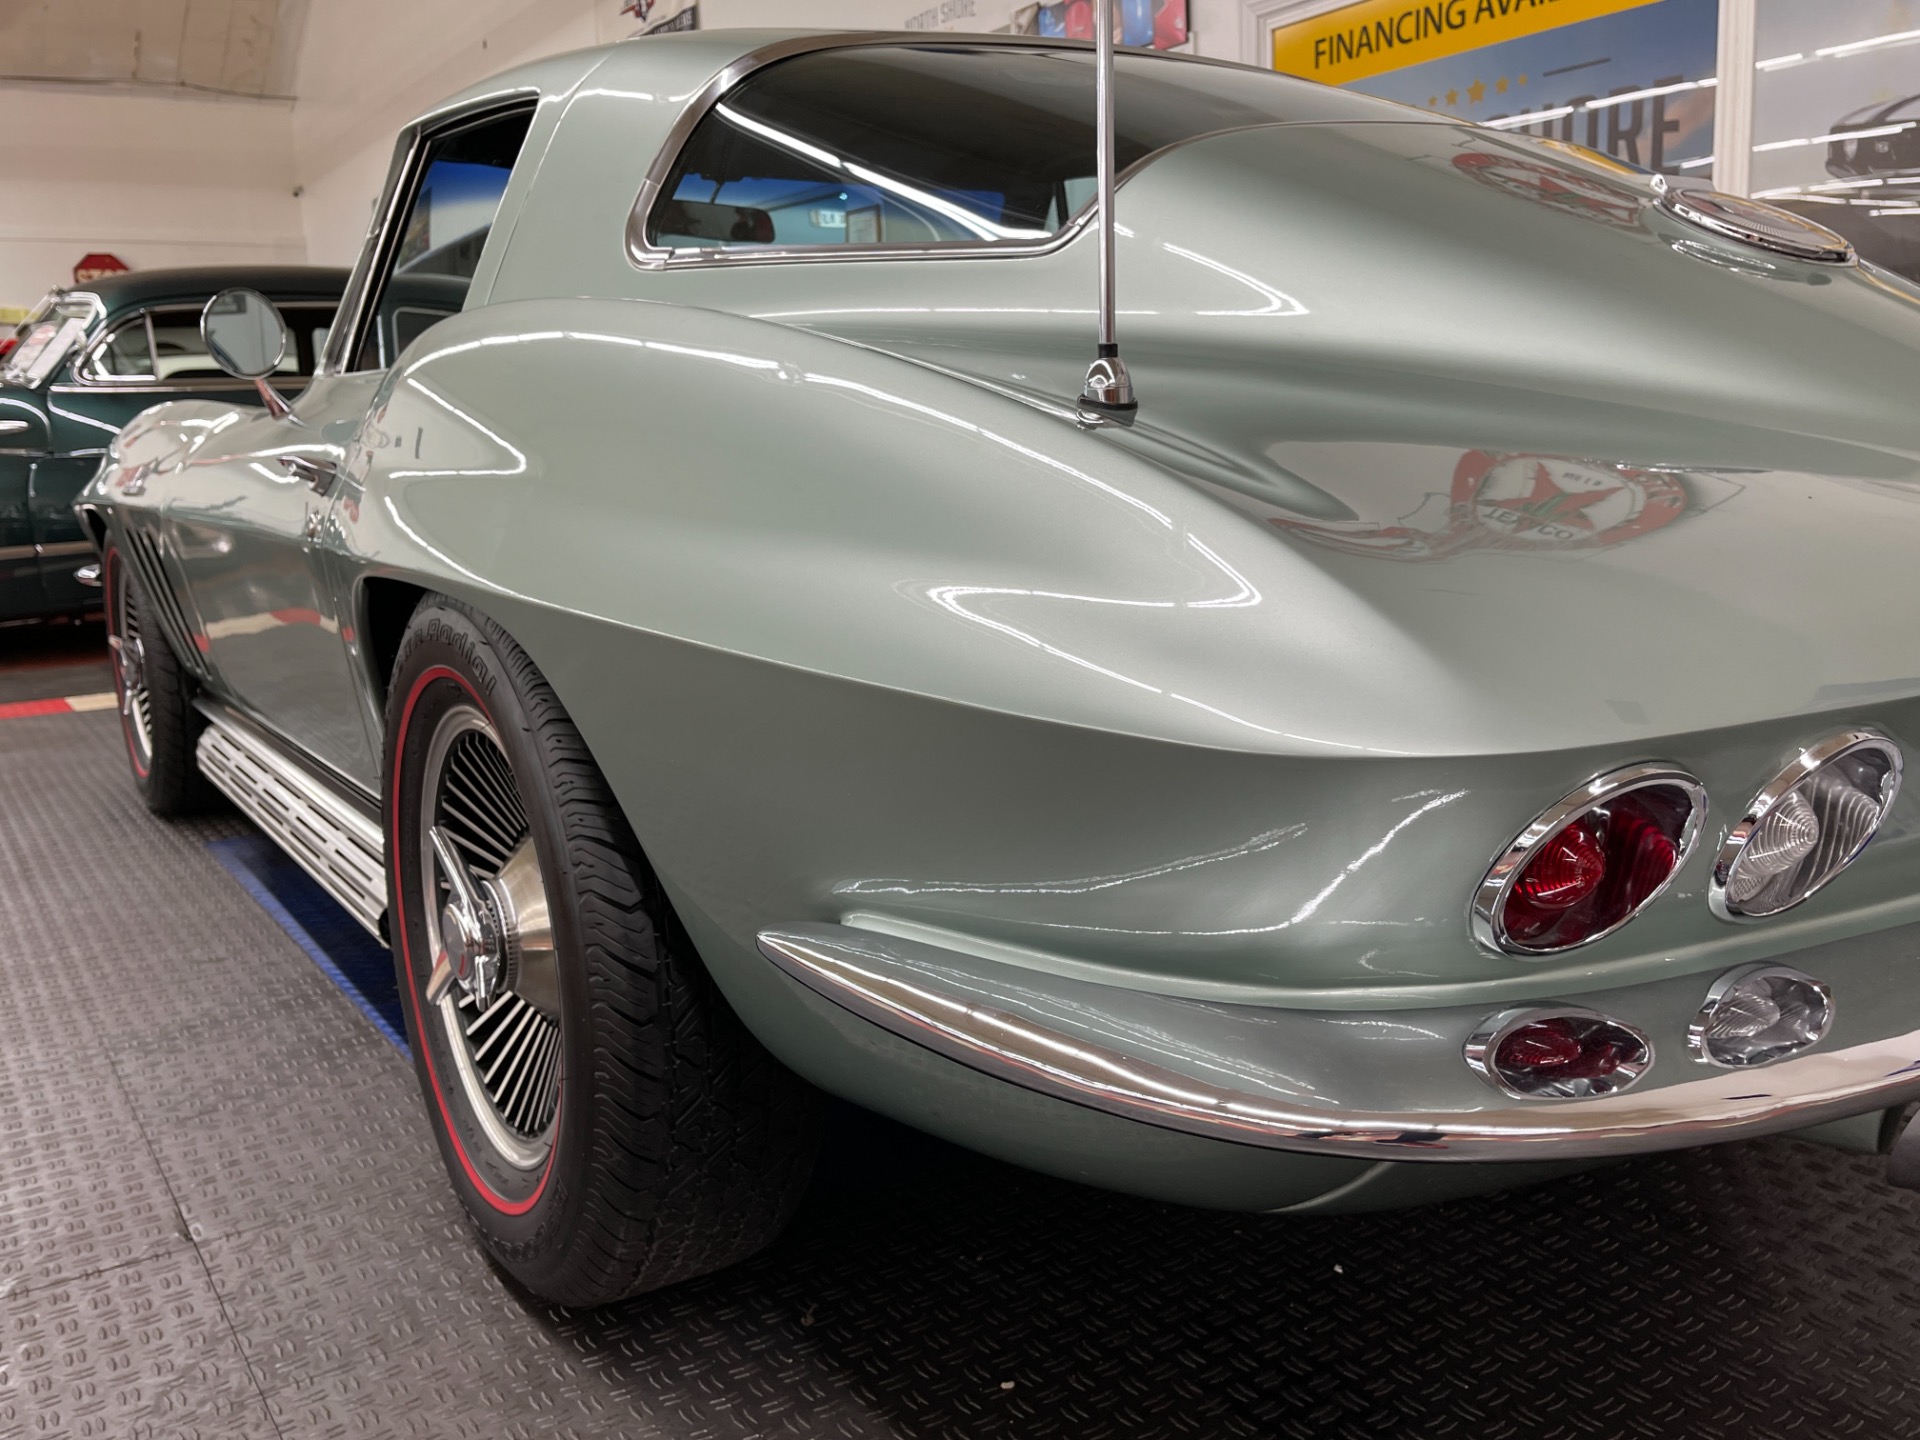 Used 1966 Chevrolet Corvette - MOSPORT GREEN COUPE - 390 HP 427 ENGINE - 4 SPEED - SEE VIDEO | Mundelein, IL